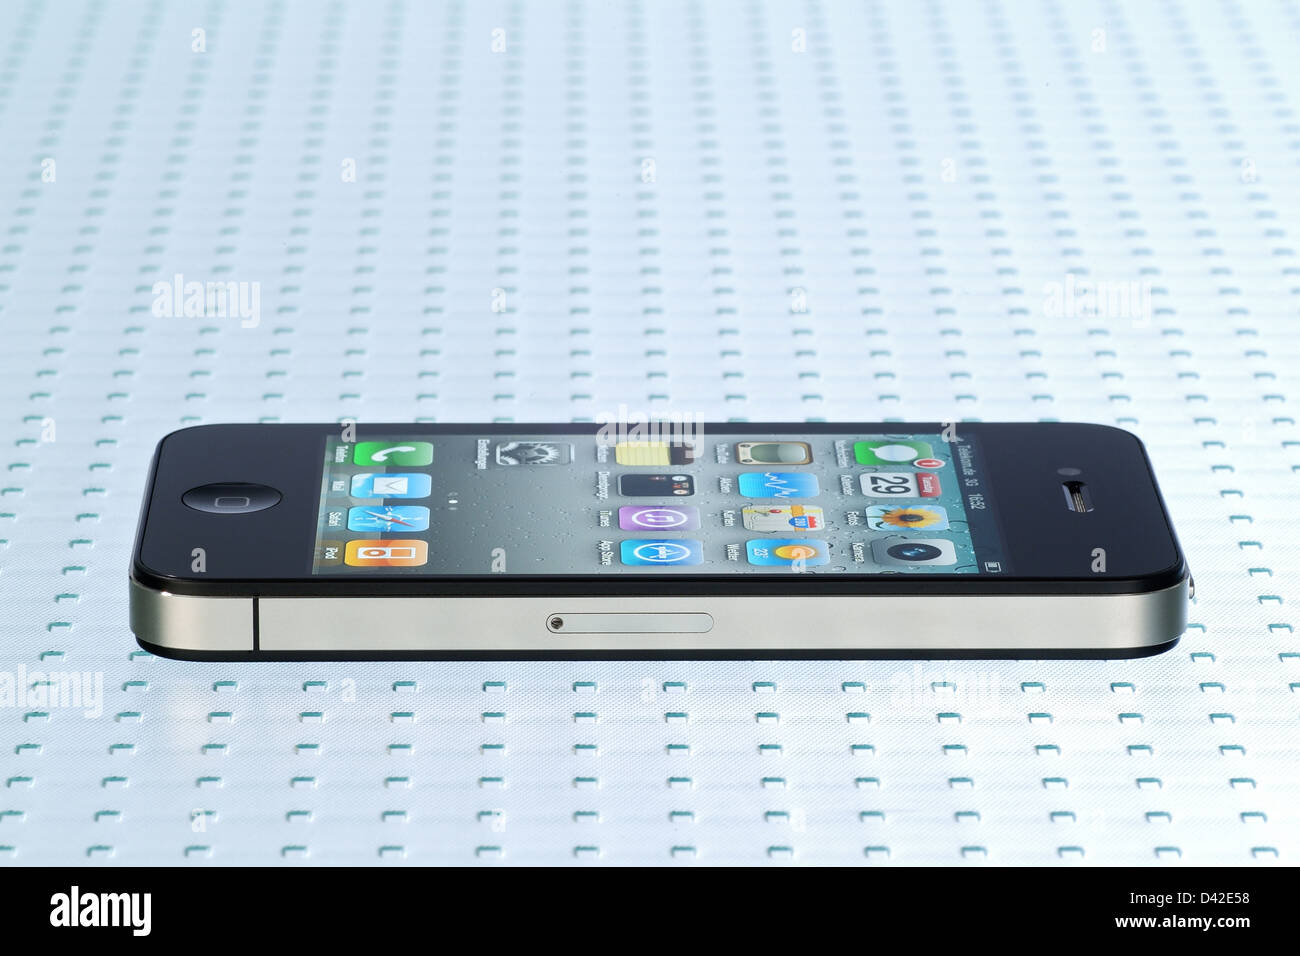 Side By Side Photos of iPhone 4S and iPhone 4 - MacRumors